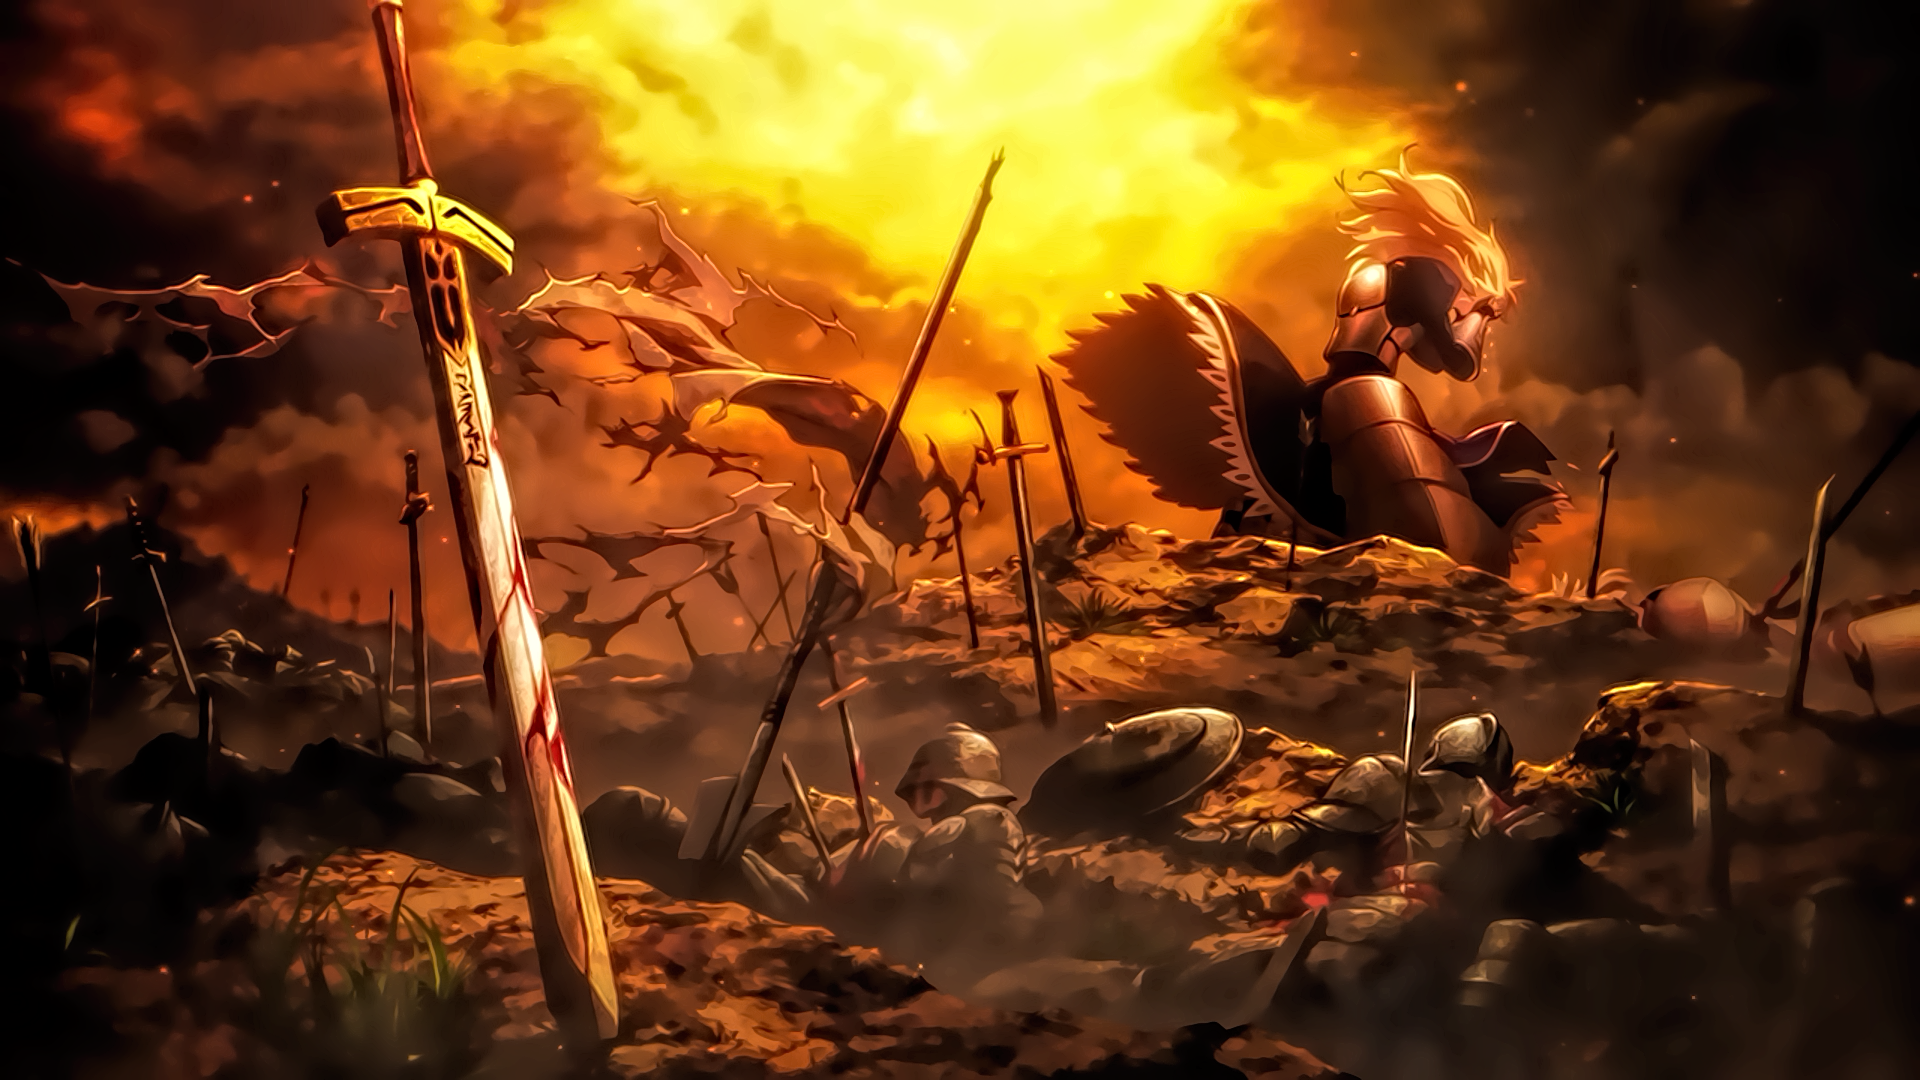 Anime Fate/Stay Night: Unlimited Blade Works HD Wallpaper by Sanoboss